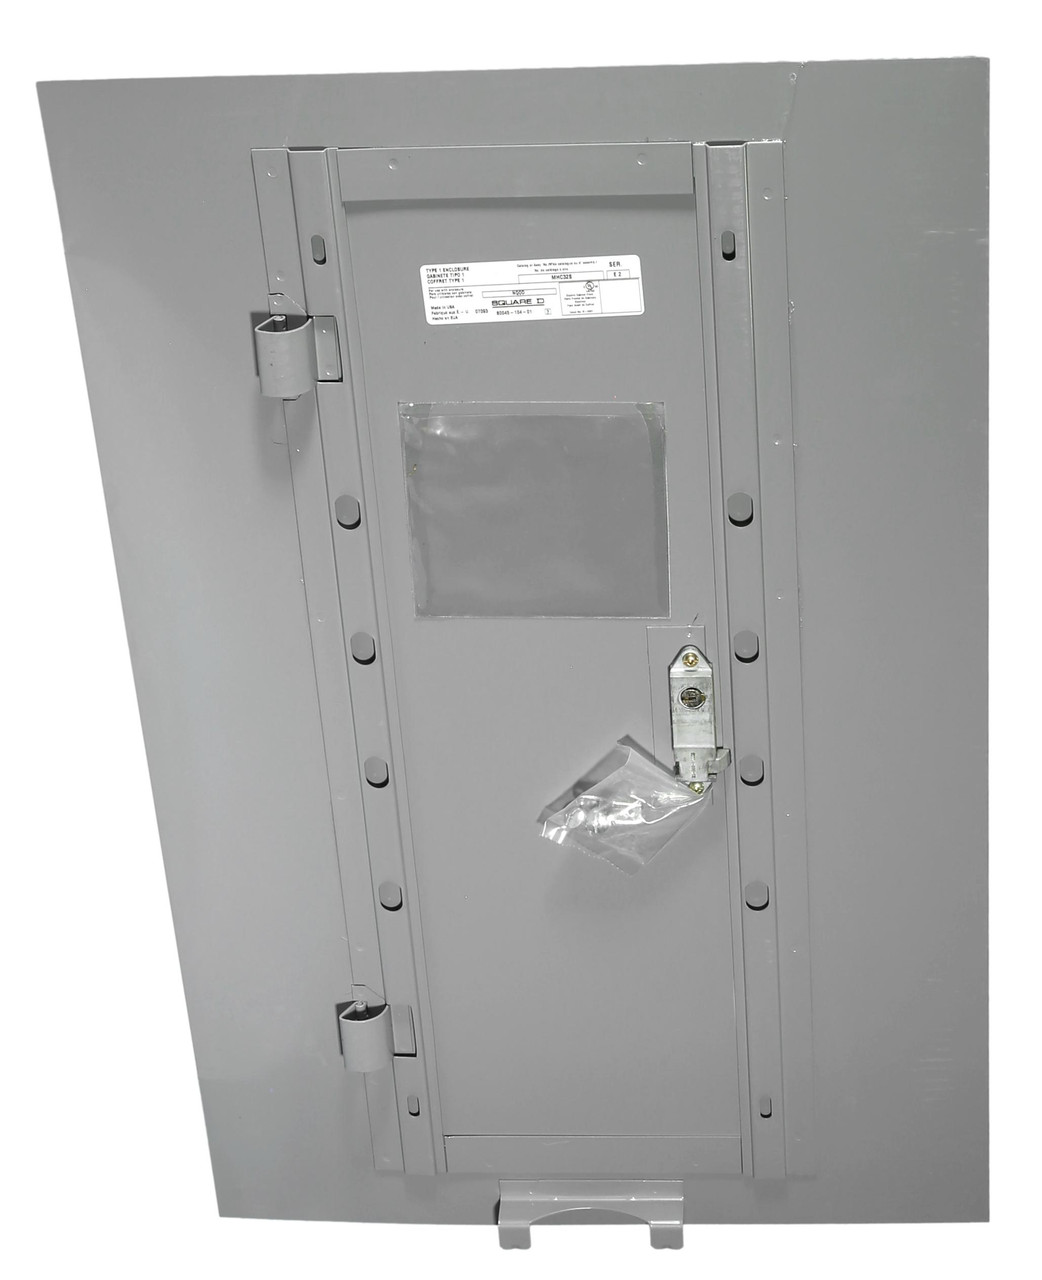 MHC32S Panelboard Cover/Trim Door for NQOD
32 Inch Tall